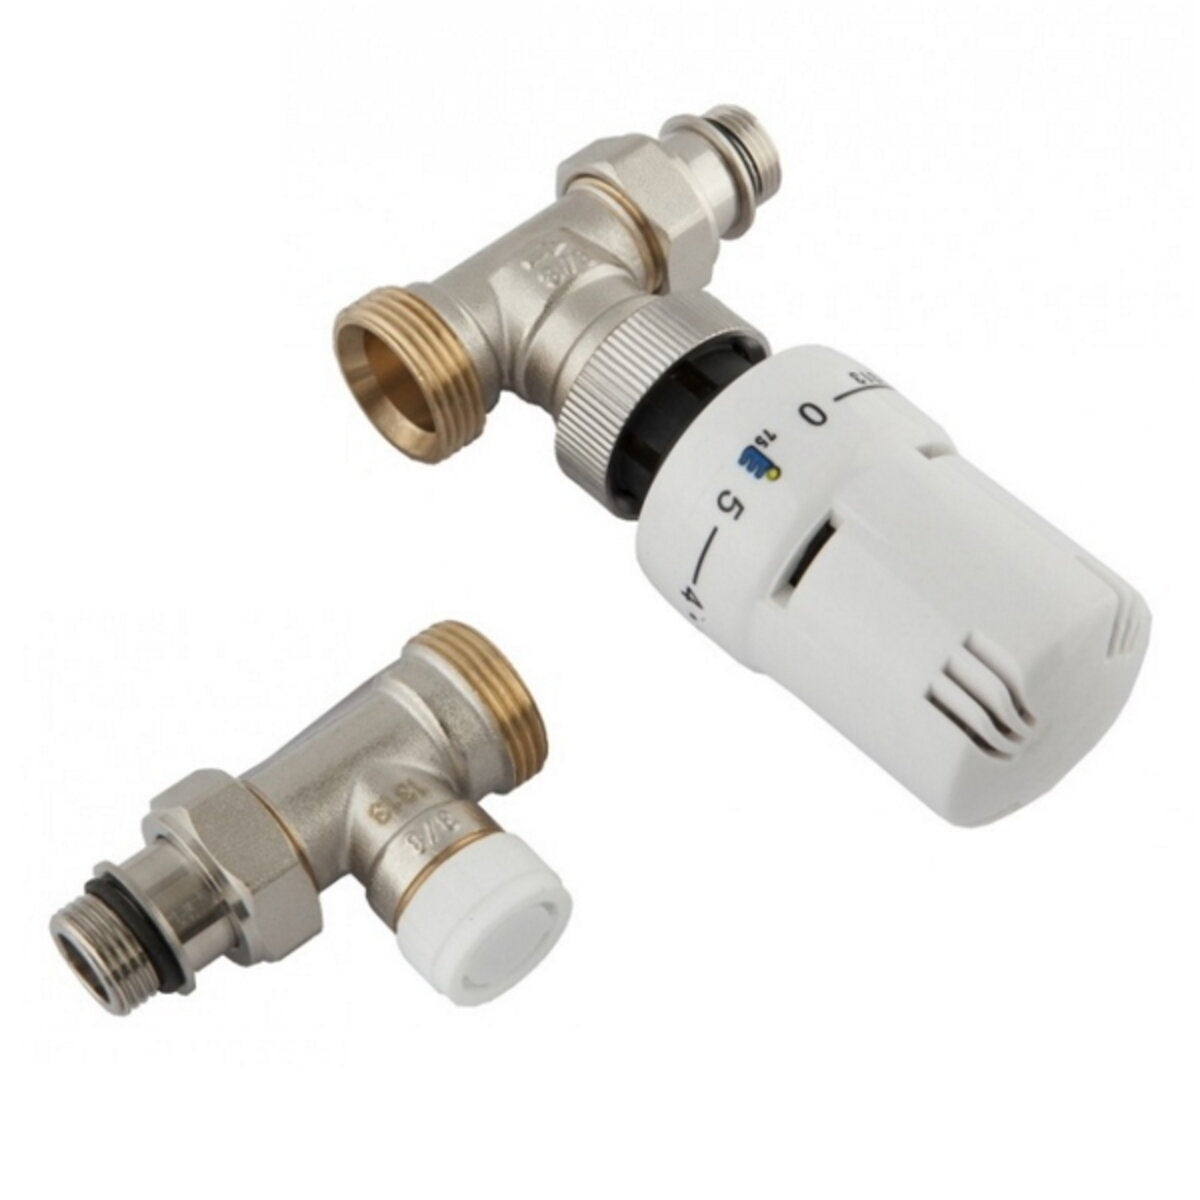 Ercos thermostatic kit with thermostatic valve and straight lockshield 1/2" connections for radiators